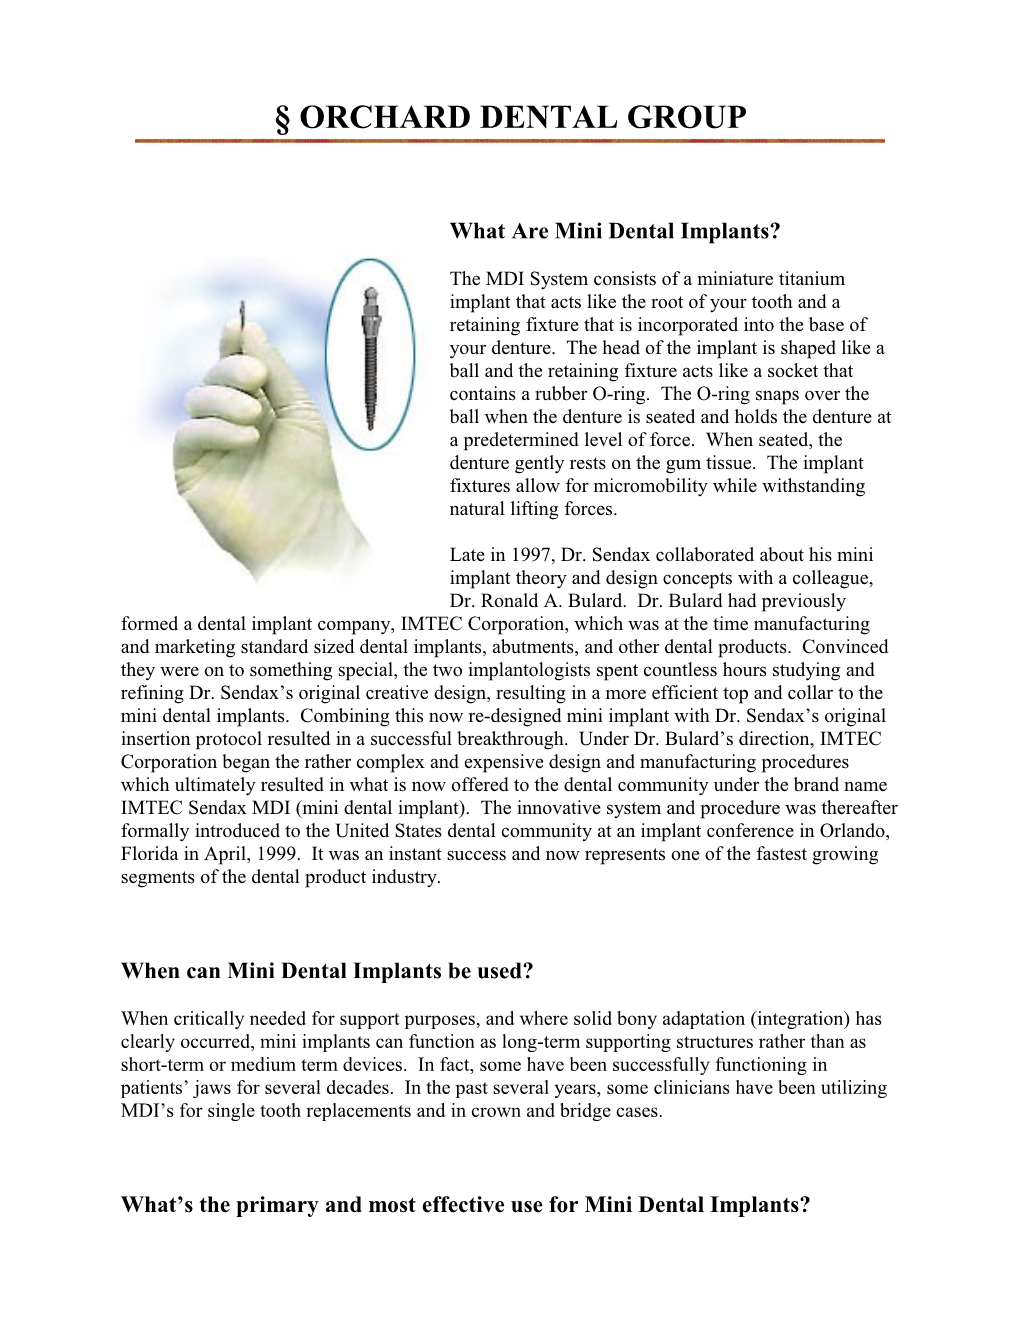 What Are Mini Dental Implants